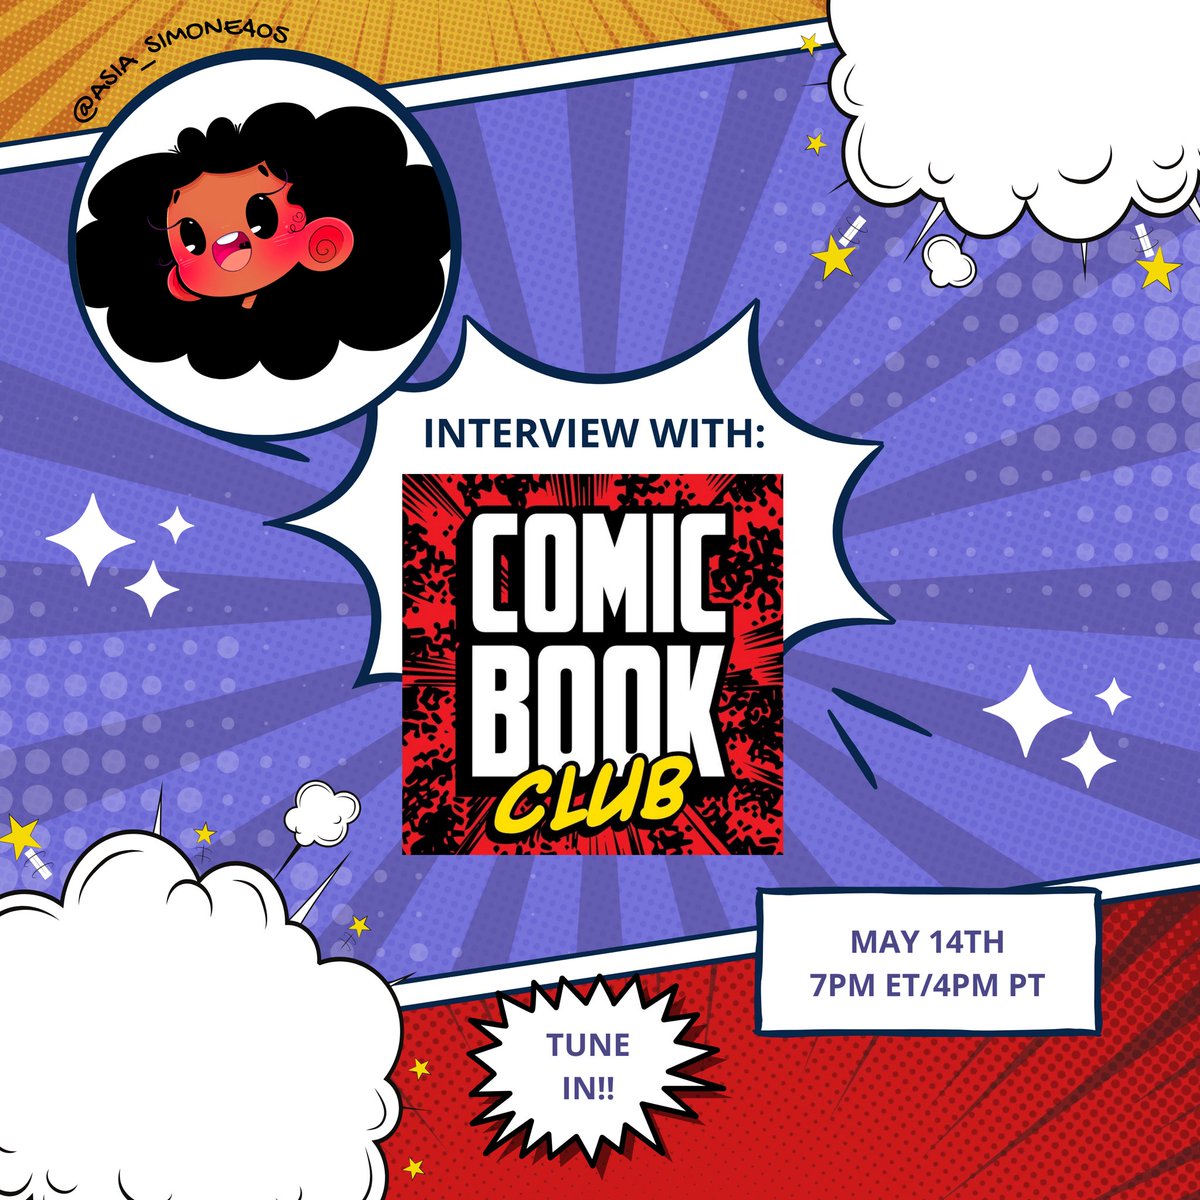 Yall!!! My first podcast interview is today with @comicbooklive !!! Tune in on Facebook or YouTube at 7pm ET/4PM PT!!! #ArtistOnTwitter #comicbookartist #comicbook